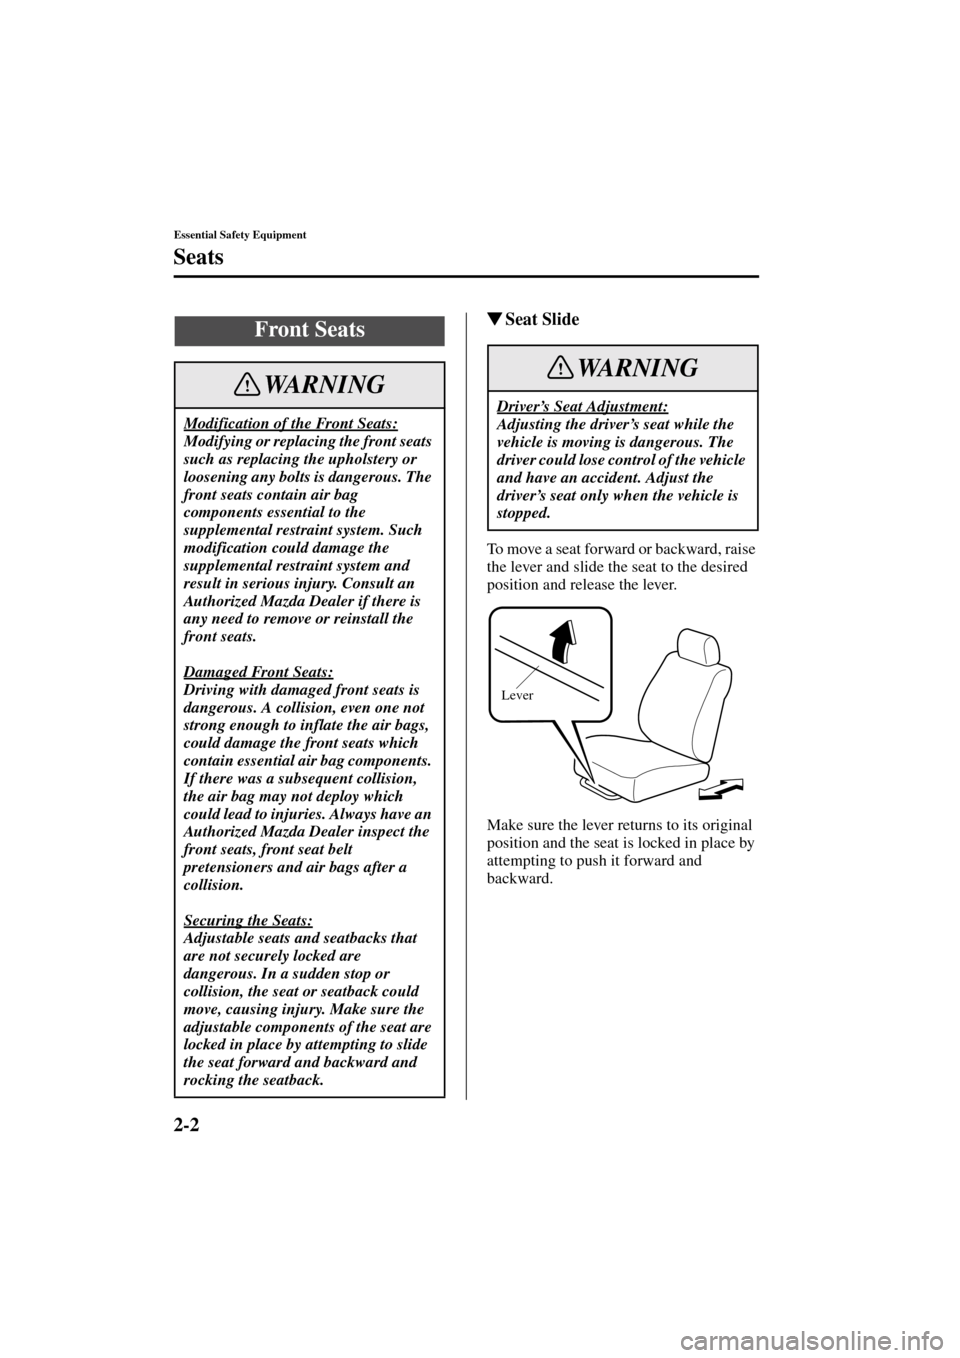 MAZDA MODEL 3 HATCHBACK 2004  Owners Manual (in English) 2-2
Essential Safety Equipment
Form No. 8S18-EA-03I
Seats
Seat Slide
To move a seat forward or backward, raise 
the lever and slide the seat to the desired 
position and release the lever.
Make sure 